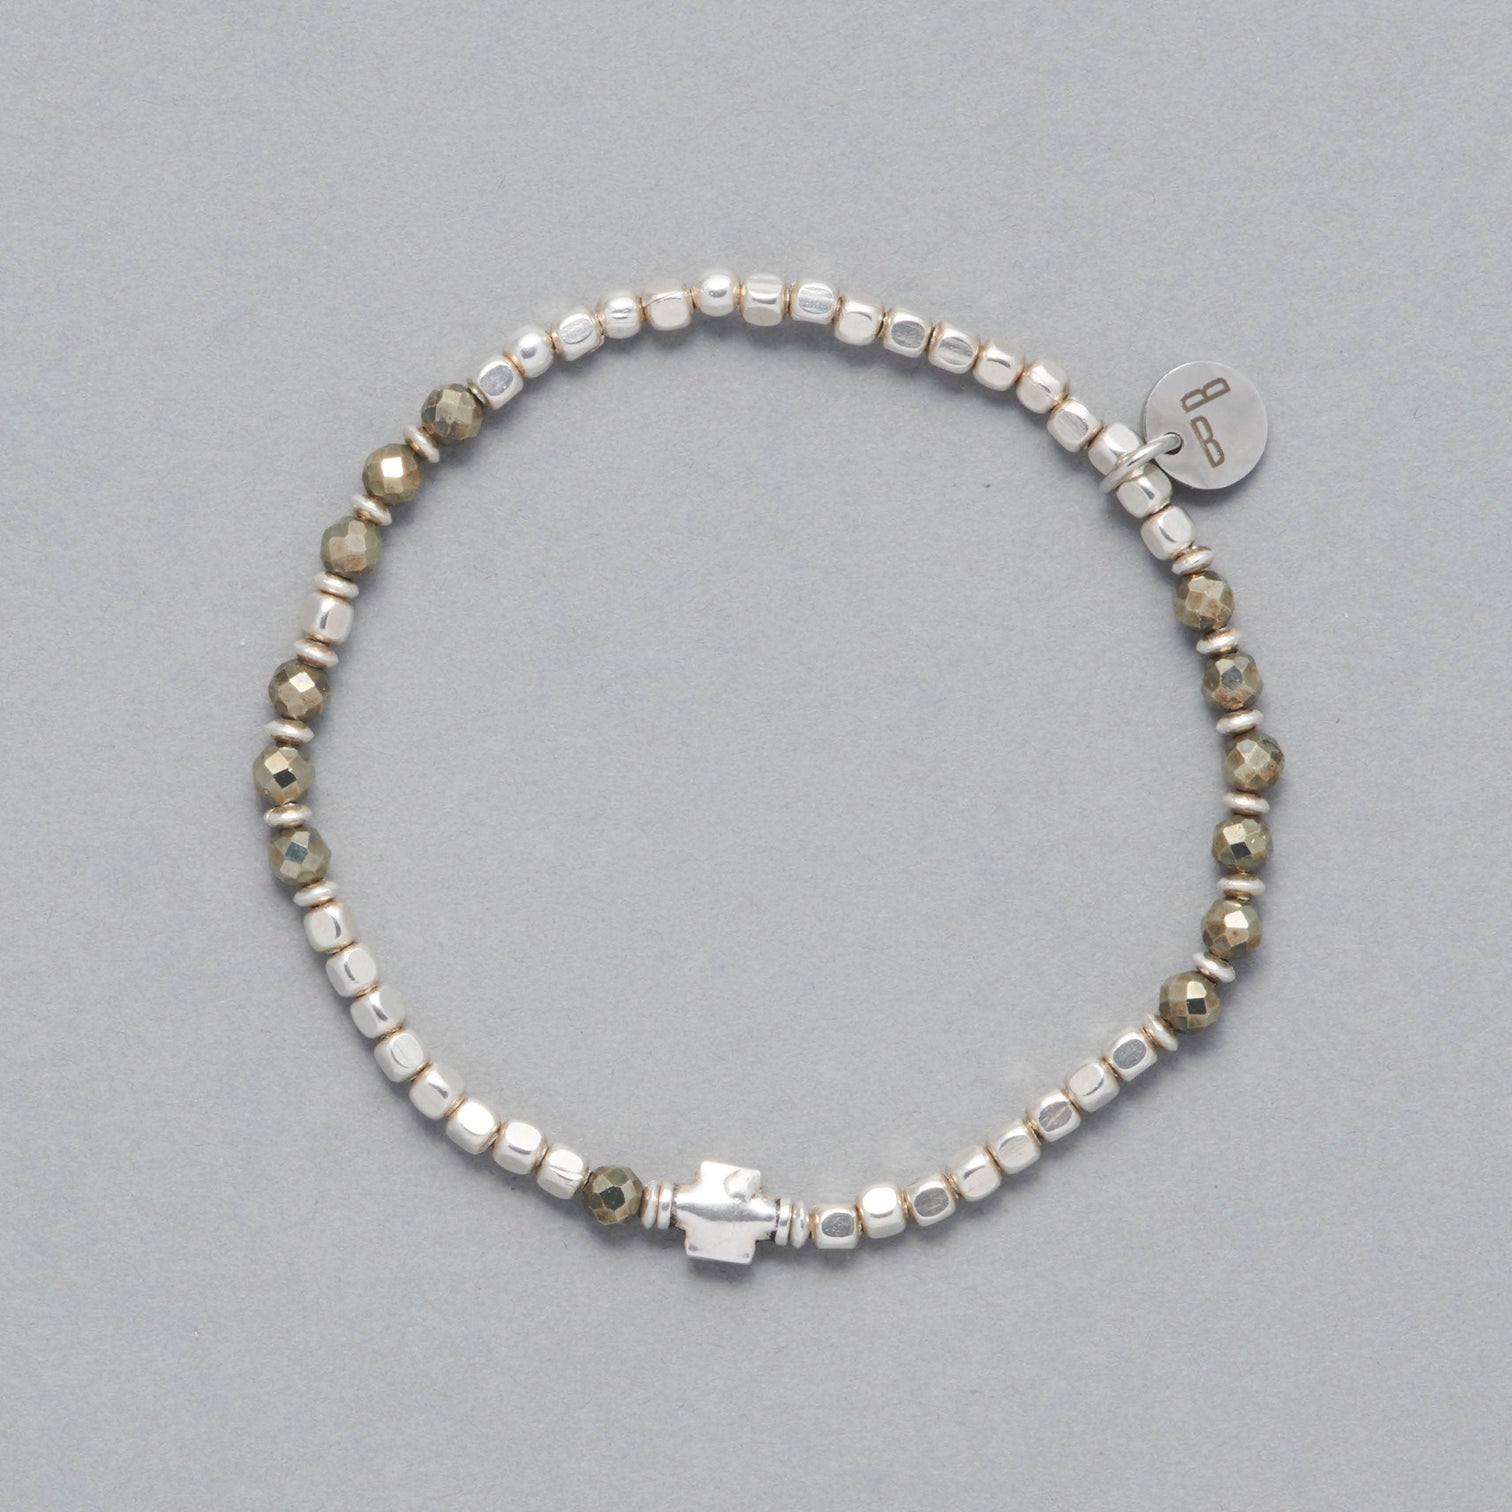 The Ceres Bracelet is strung with faceted Pyrite beads, octagonal sterling silver beads and as a center piece a sterling silver element 